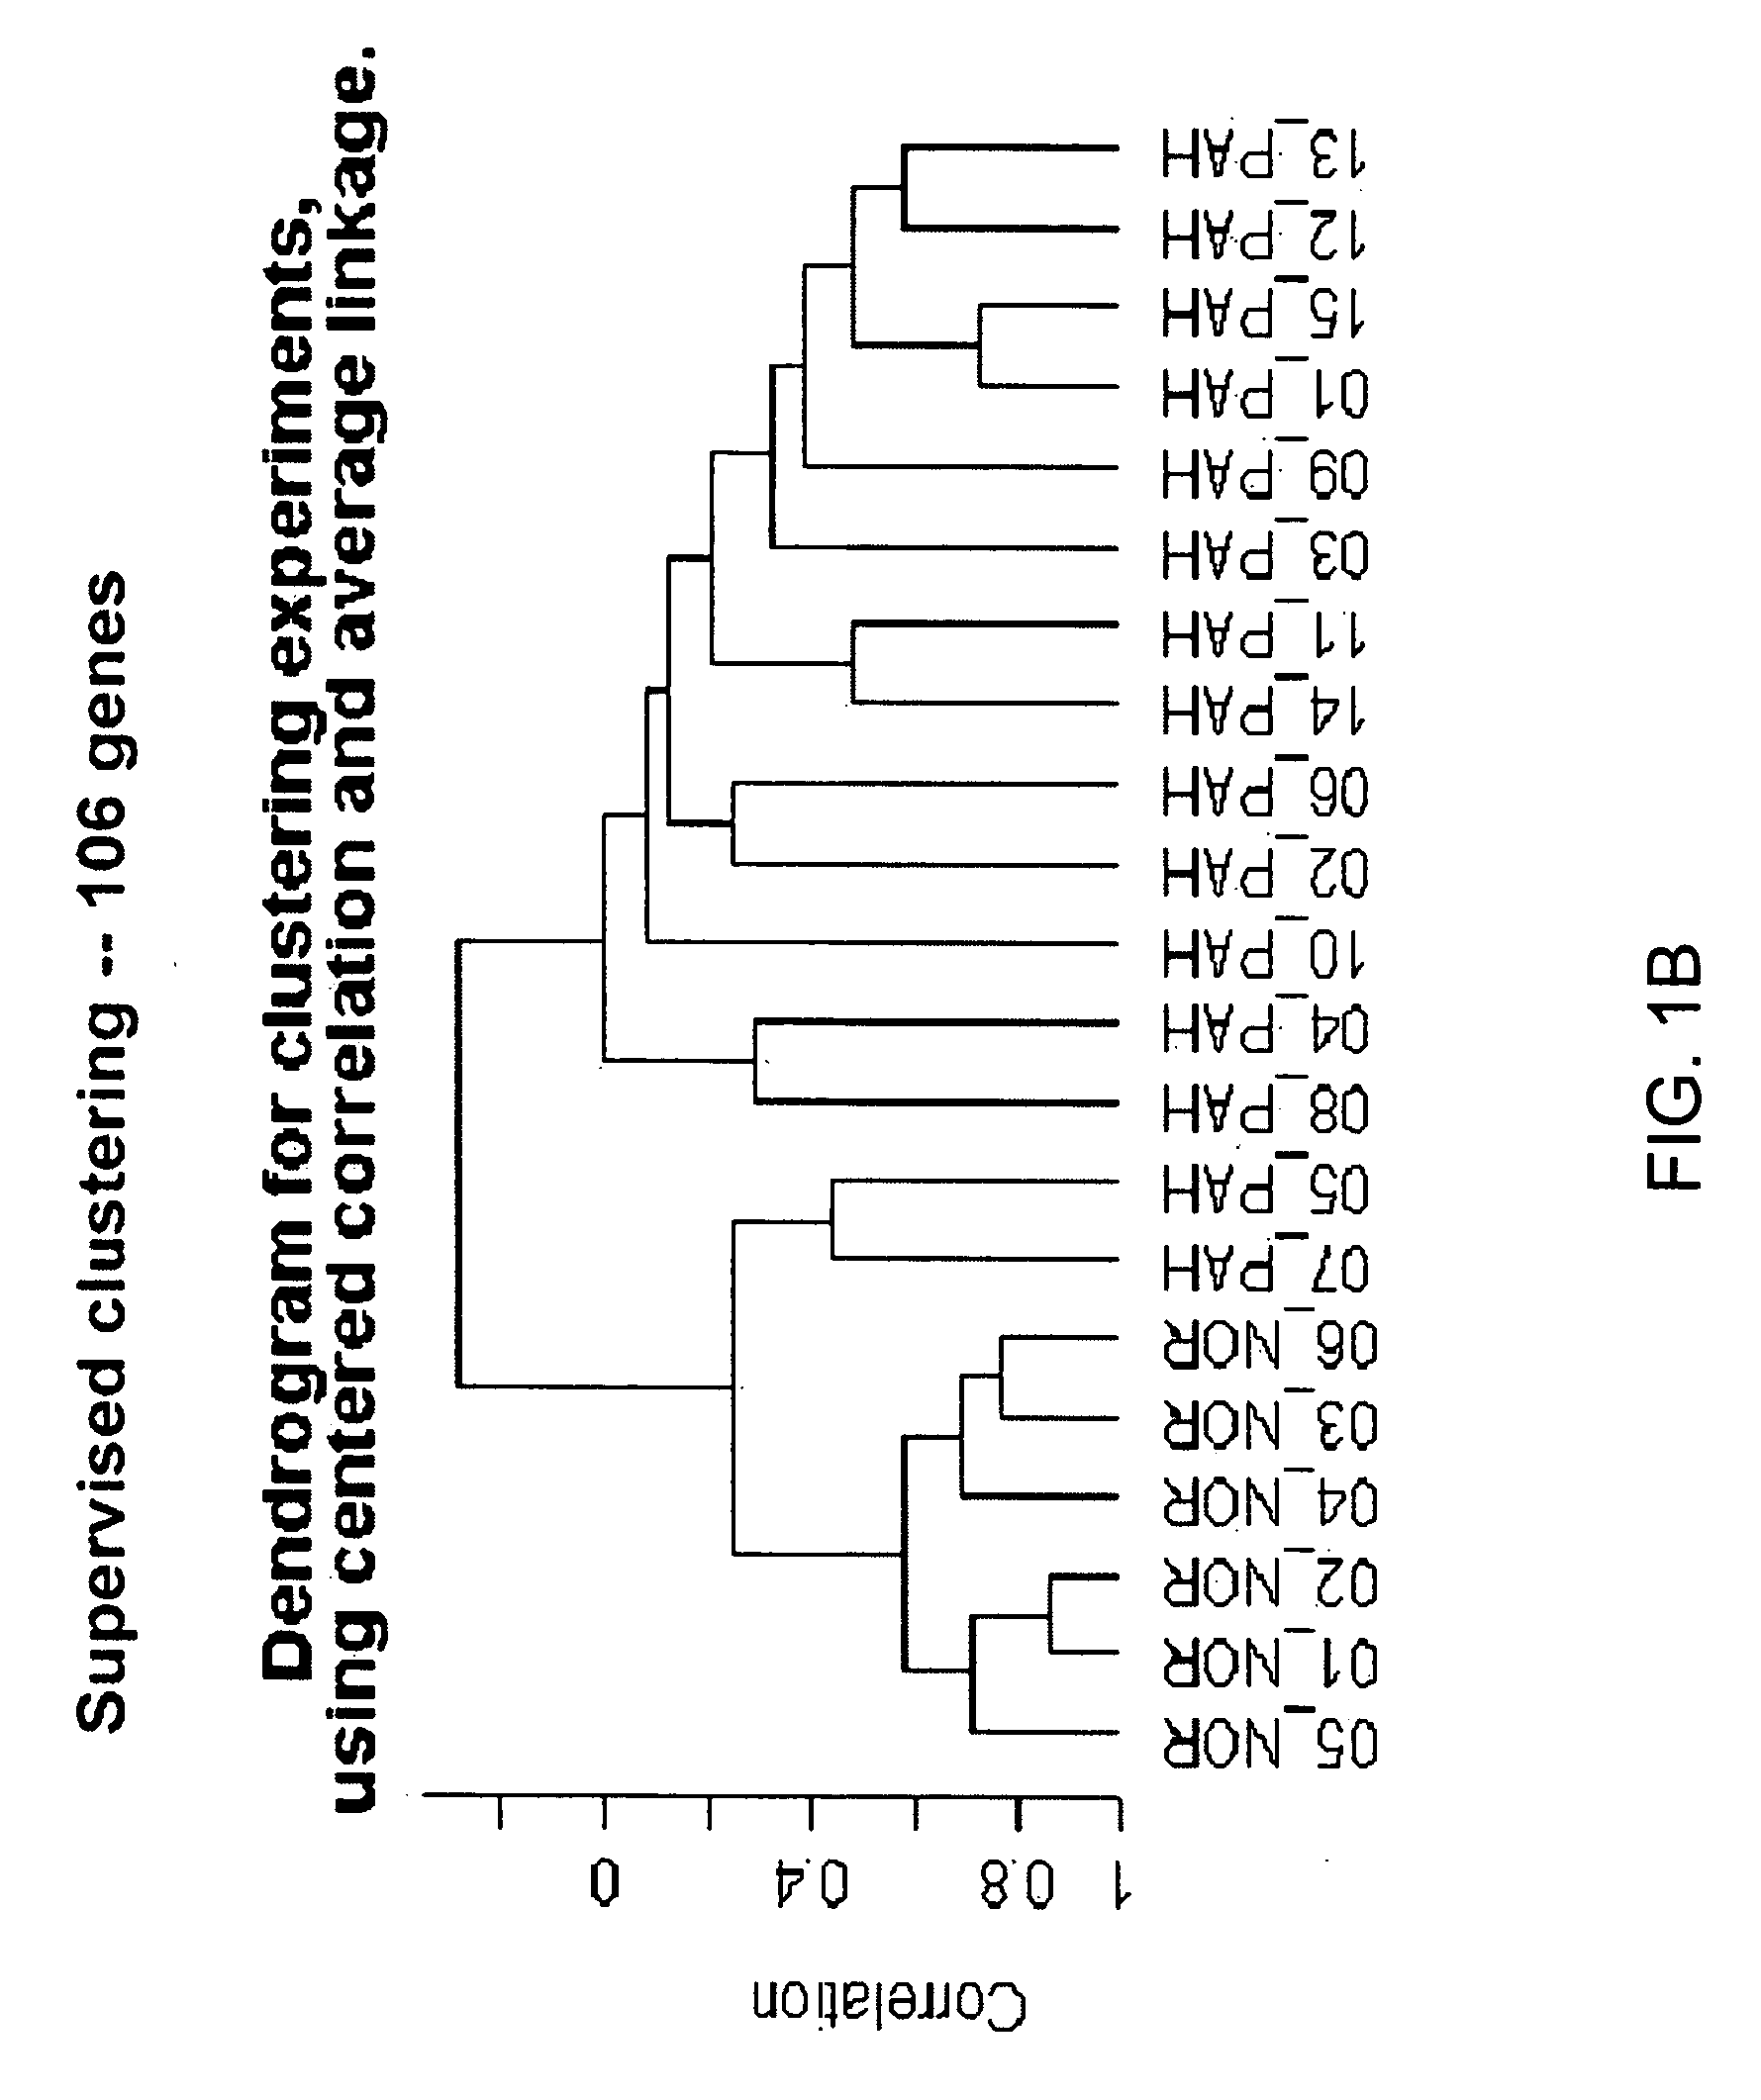 Diagnosis of disease and monitoring of therapy using gene expression analysis of peripheral blood cells